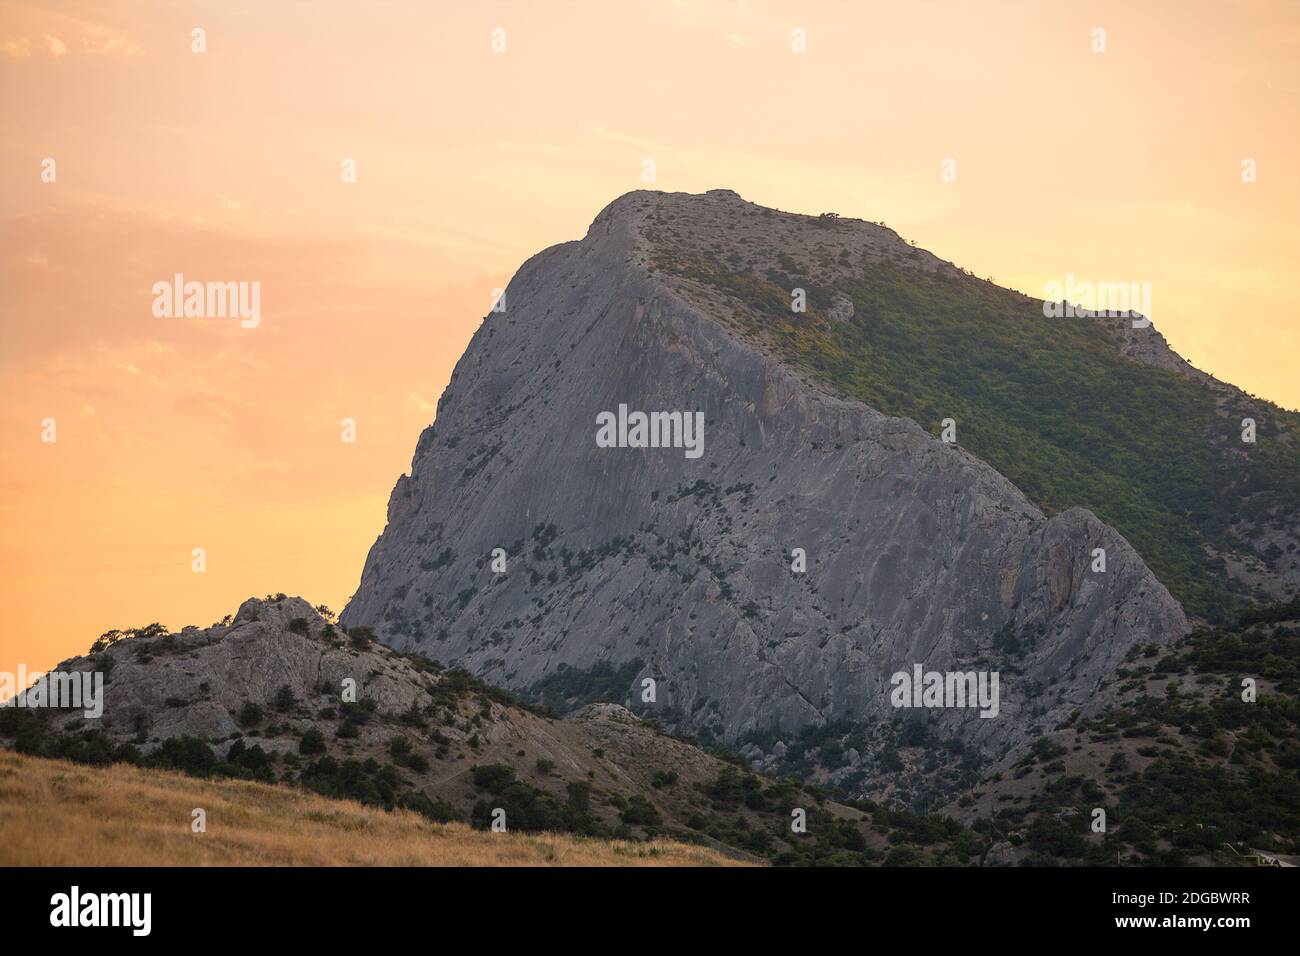 Highest mountain with steep slope at dawn or sunset light pale pink sky Stock Photo